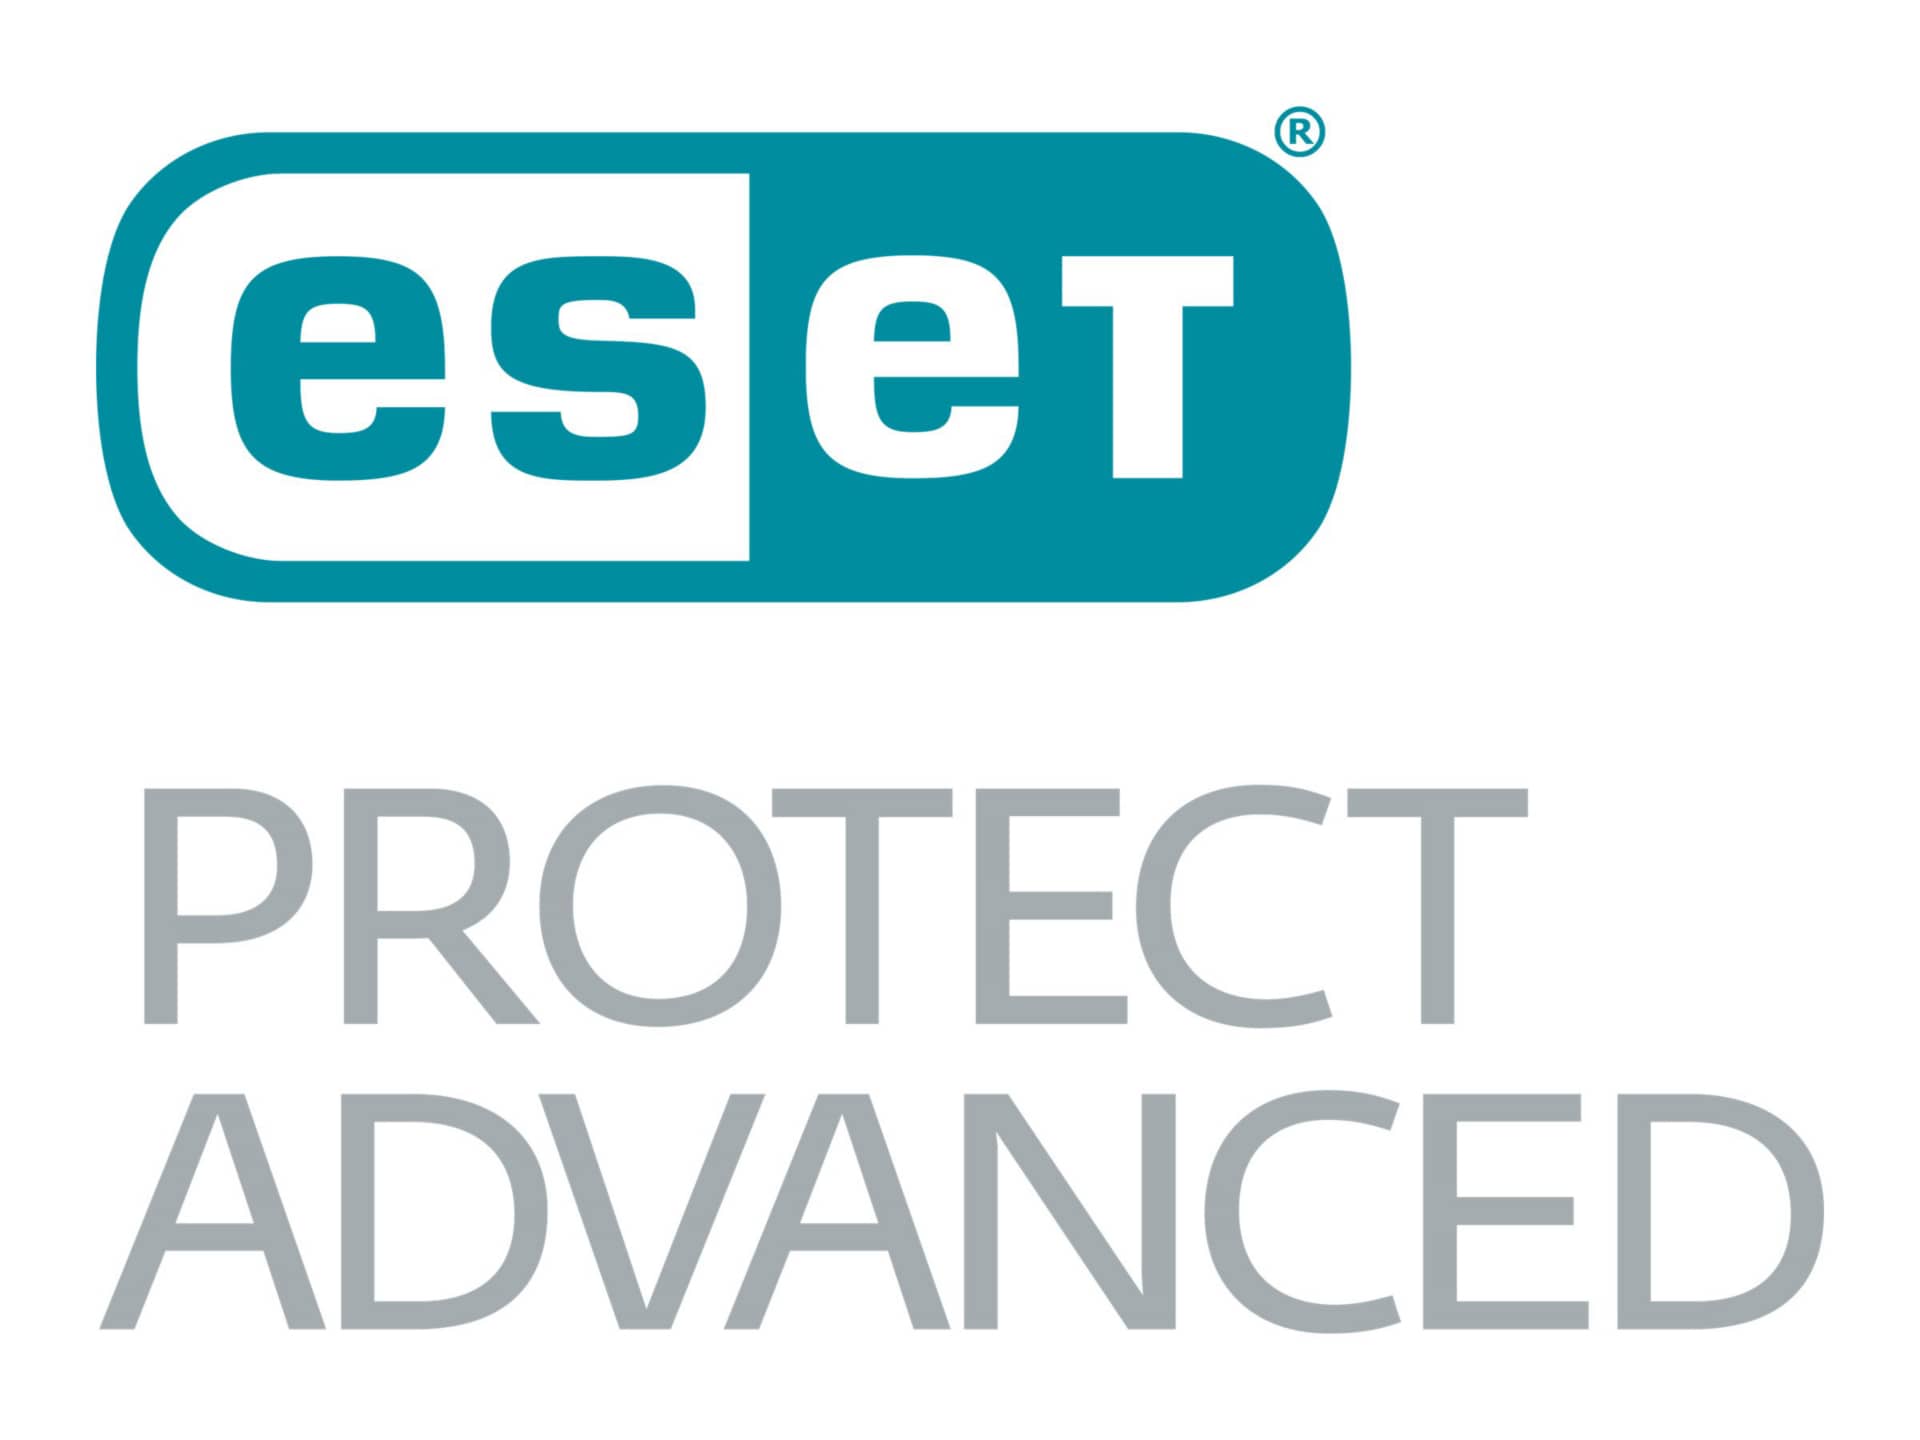 ESET PROTECT Advanced - subscription license (1 year) - 1 seat